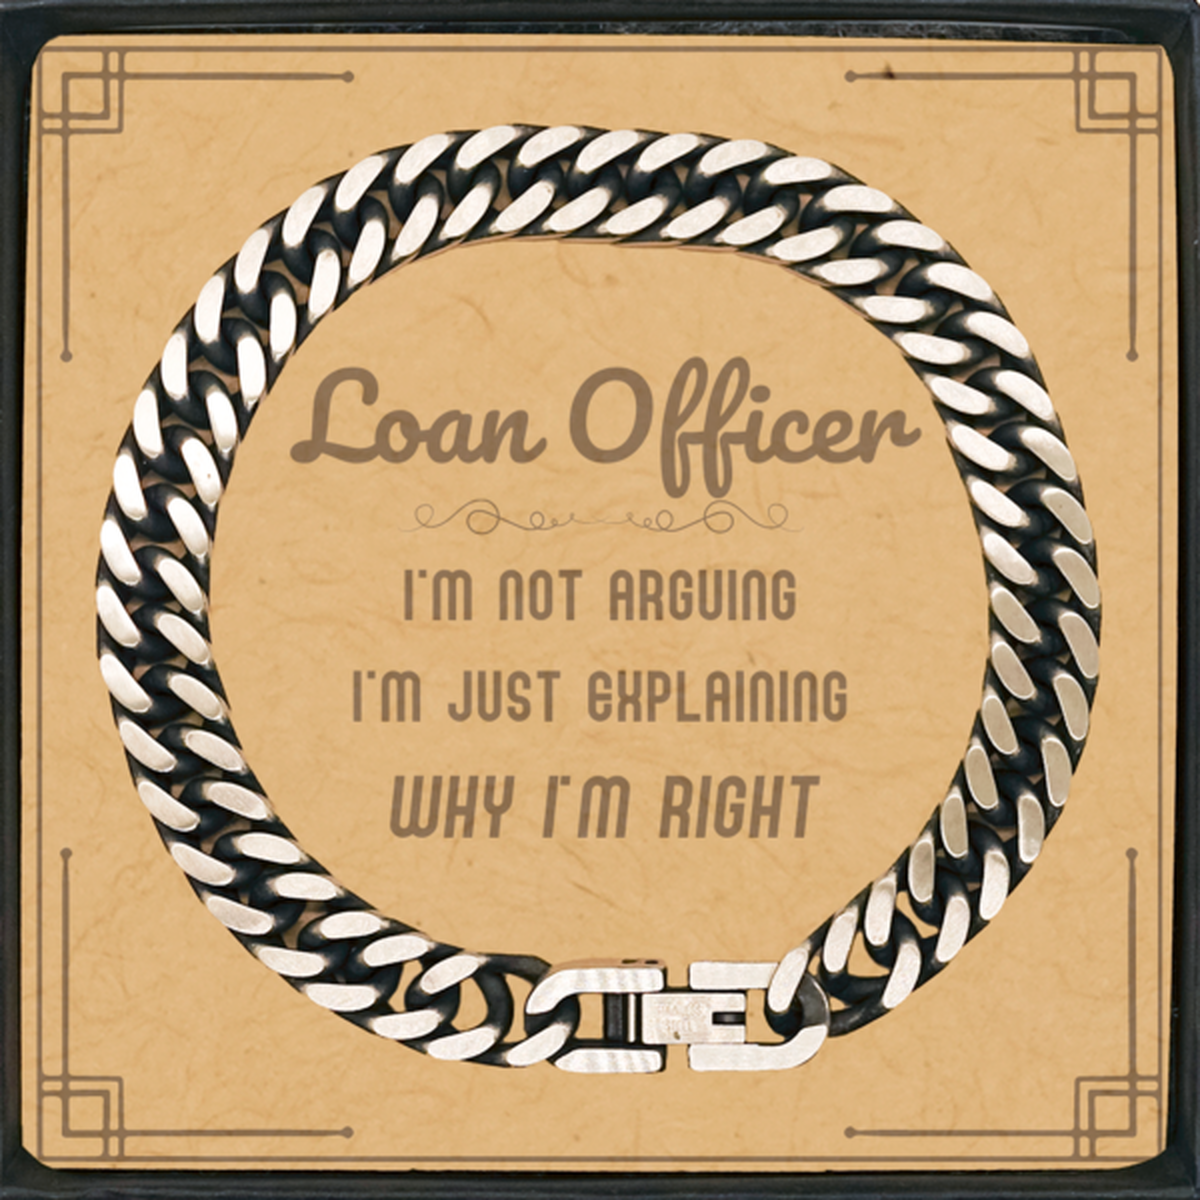 Loan Officer I'm not Arguing. I'm Just Explaining Why I'm RIGHT Cuban Link Chain Bracelet, Funny Saying Quote Loan Officer Gifts For Loan Officer Message Card Graduation Birthday Christmas Gifts for Men Women Coworker